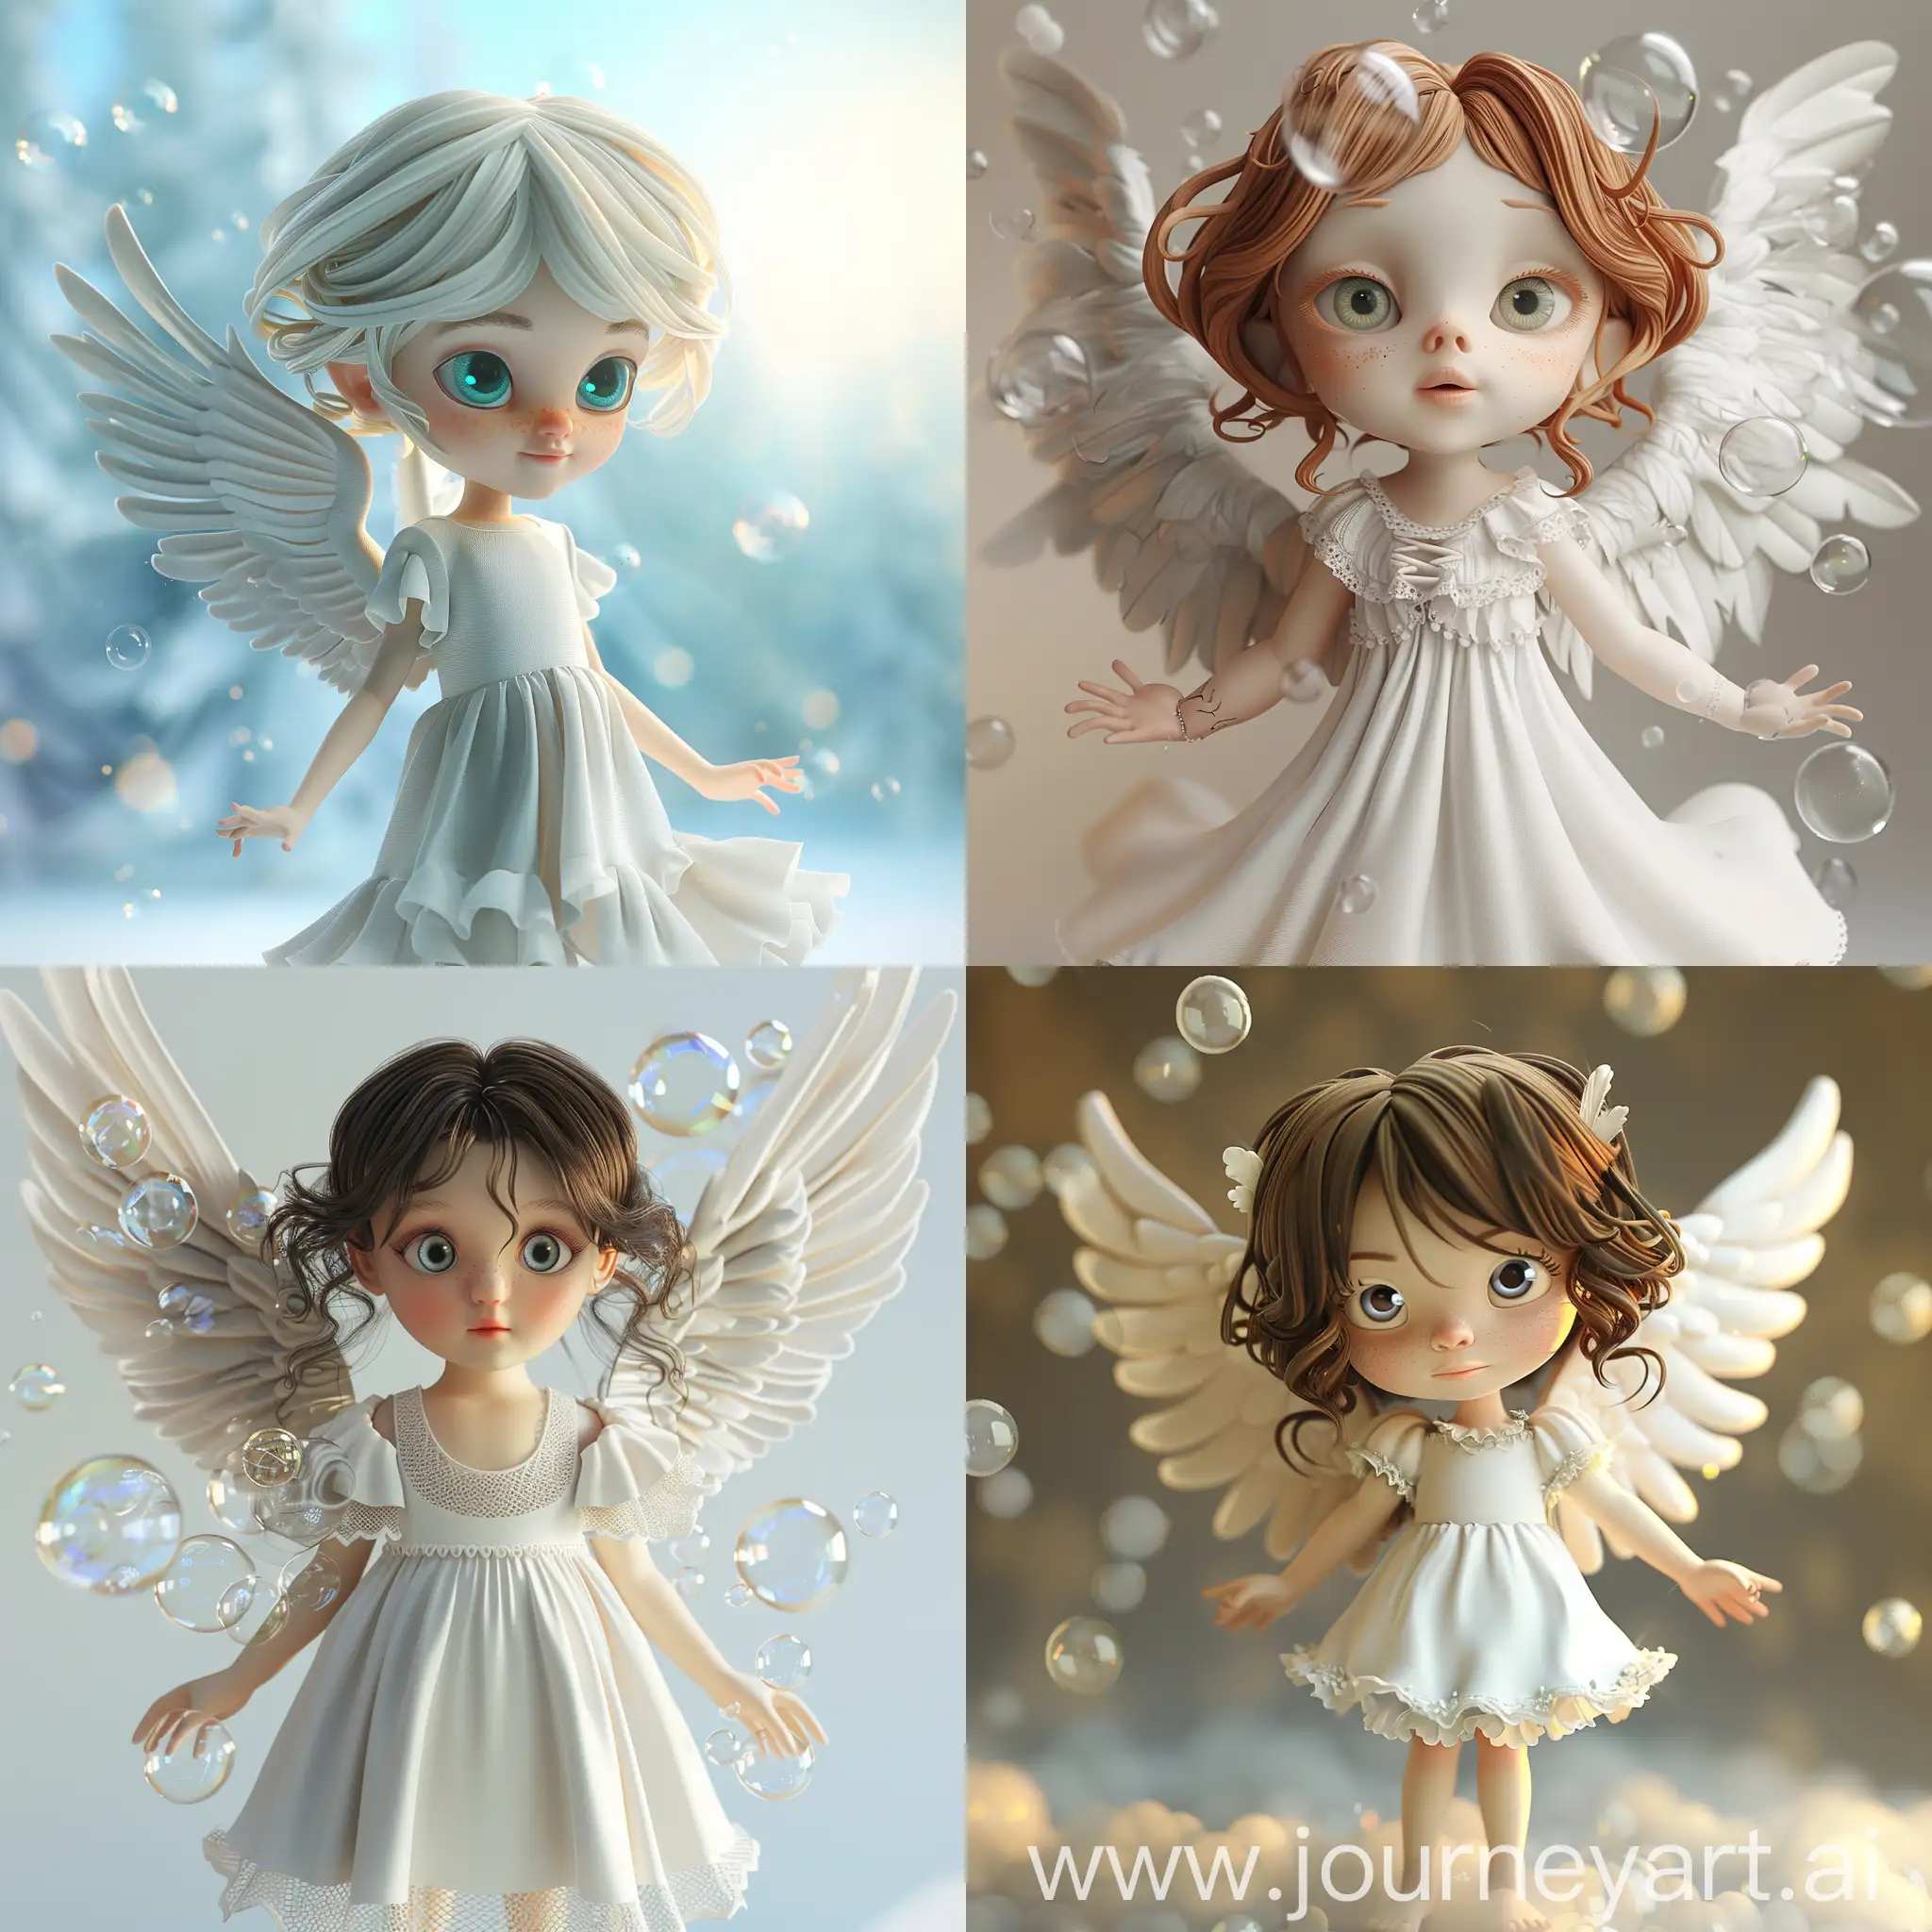 Cherubic-Angel-Girl-in-a-Bright-White-Dress-with-Bubble-Matte-Style